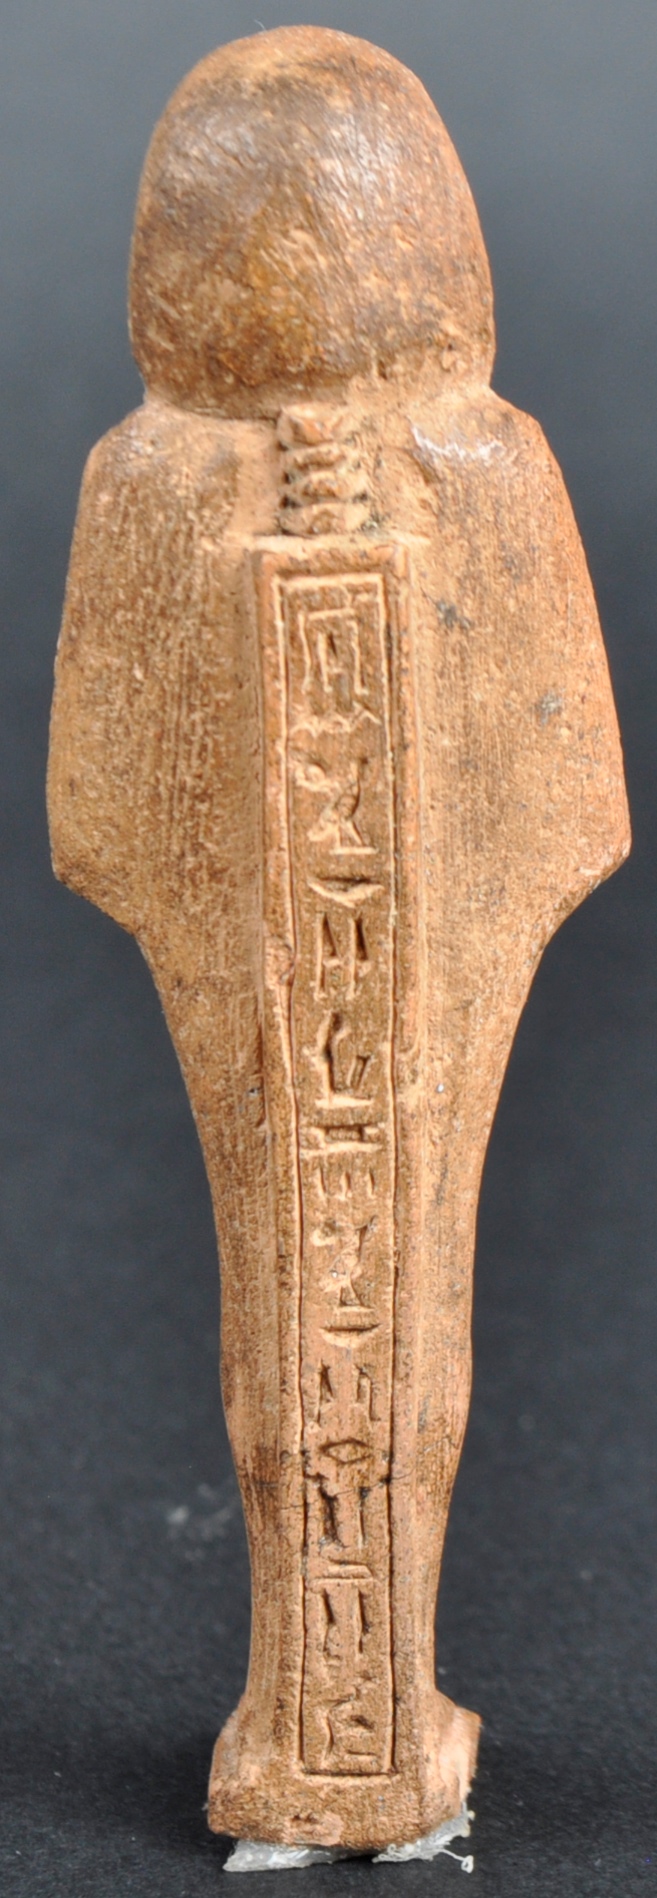 BELIEVED LATE PERIOD EGYPTIAN SHABTI FIGURE - Image 3 of 5